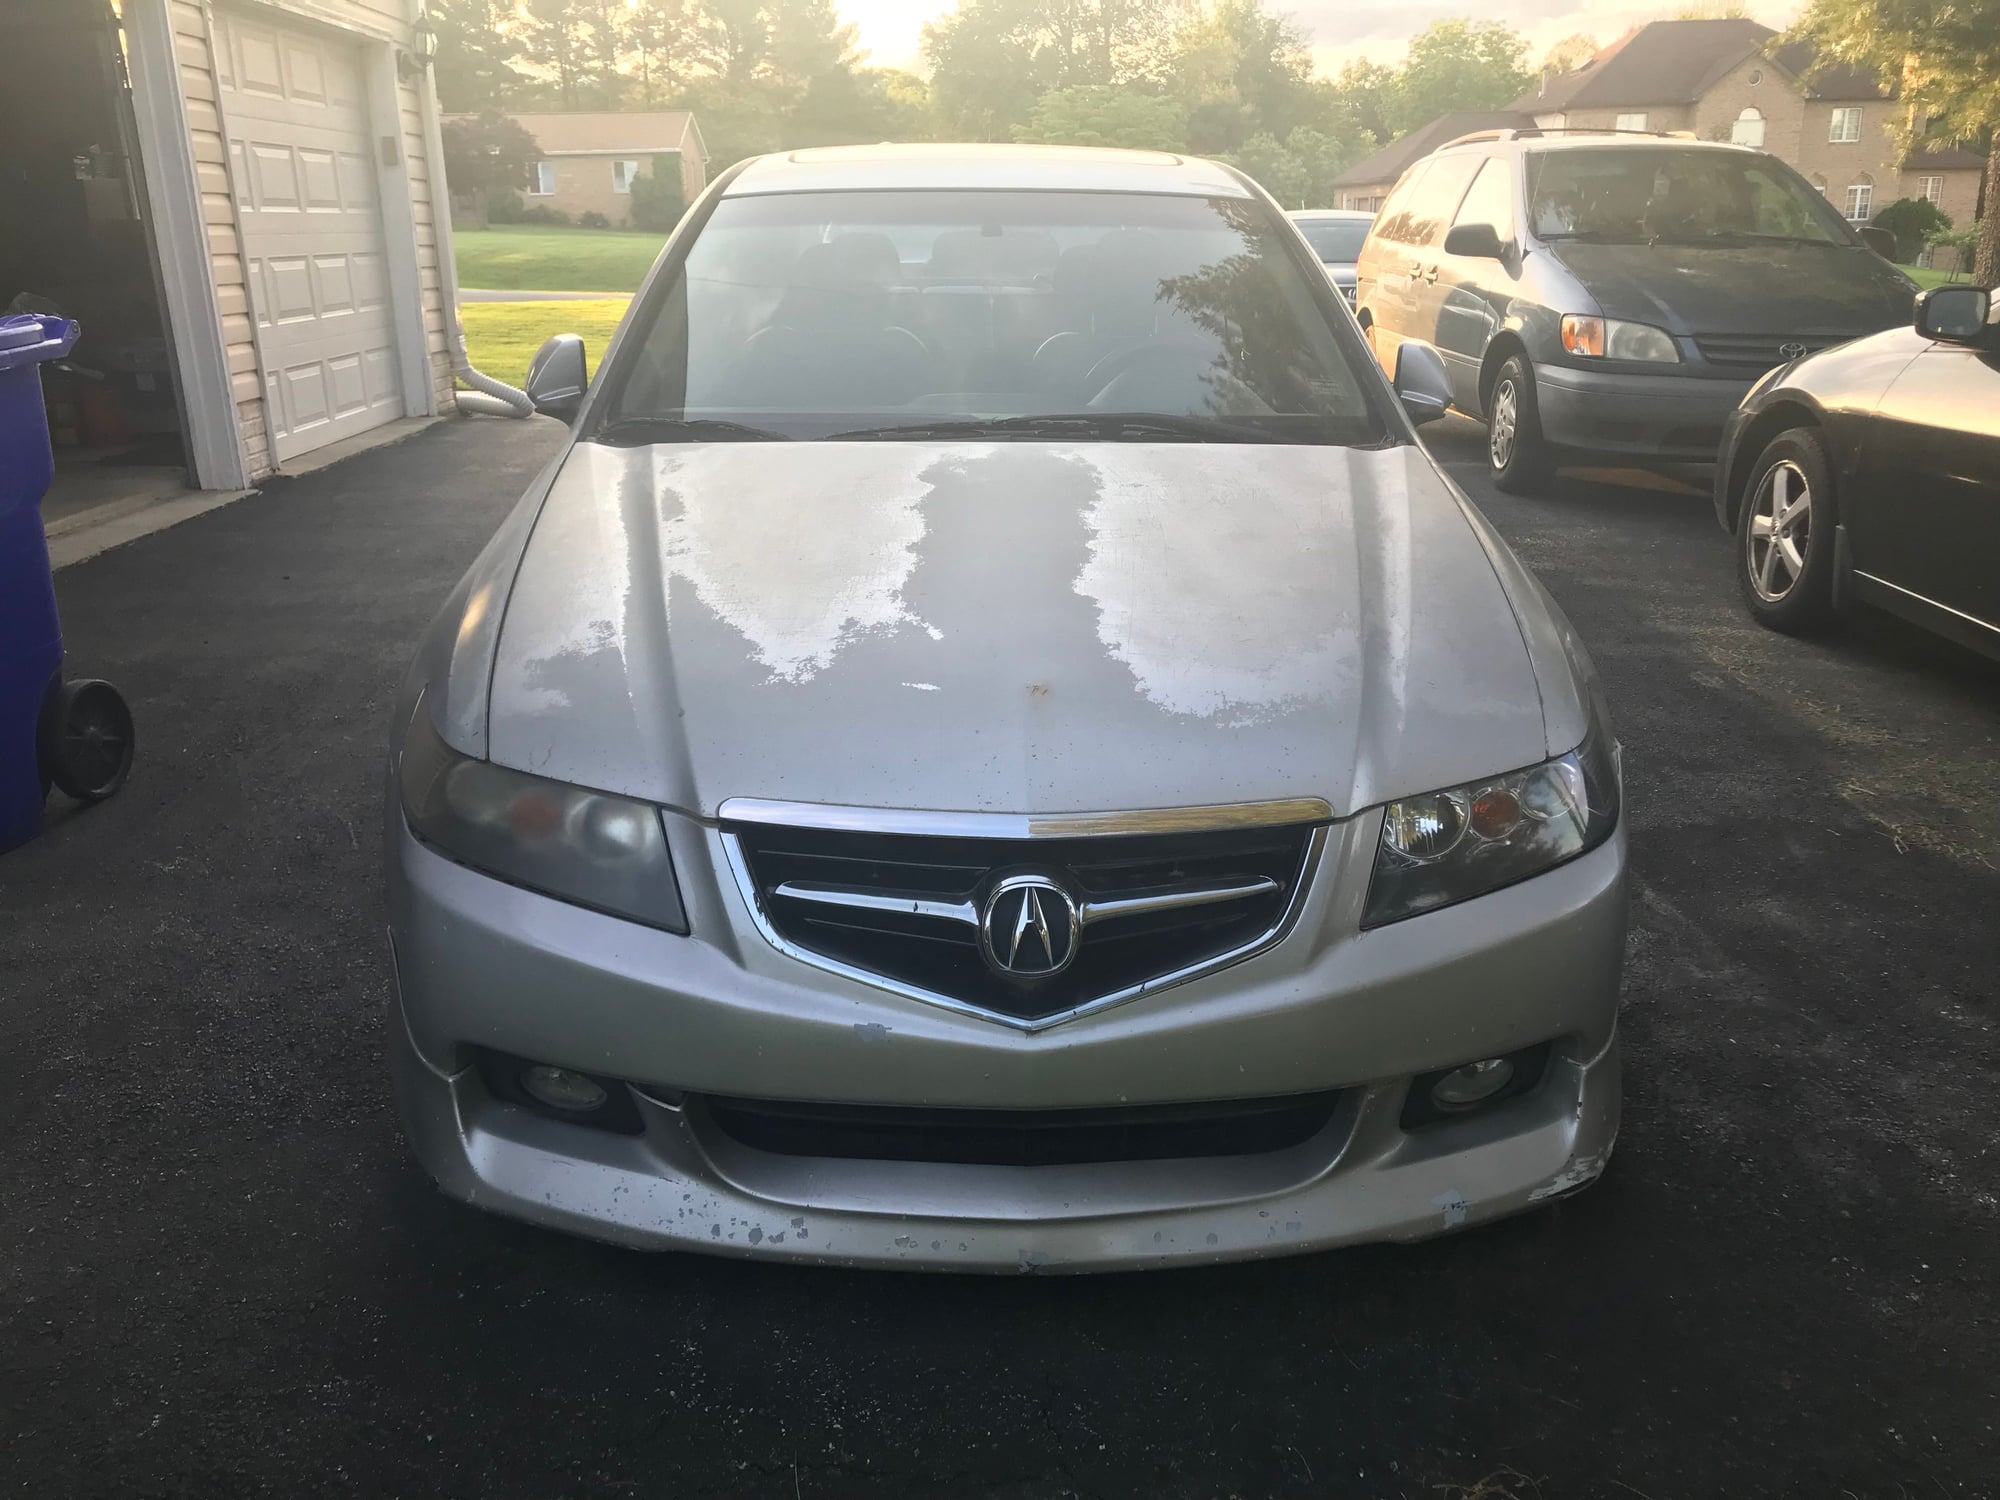 2004 Acura TSX - SOLD: 2004 Acura TSX Comptech Supercharged - Used - VIN JH4CL969X4C024856 - 242,000 Miles - 4 cyl - 2WD - Automatic - Sedan - Silver - Silver Spring, MD 20905, United States